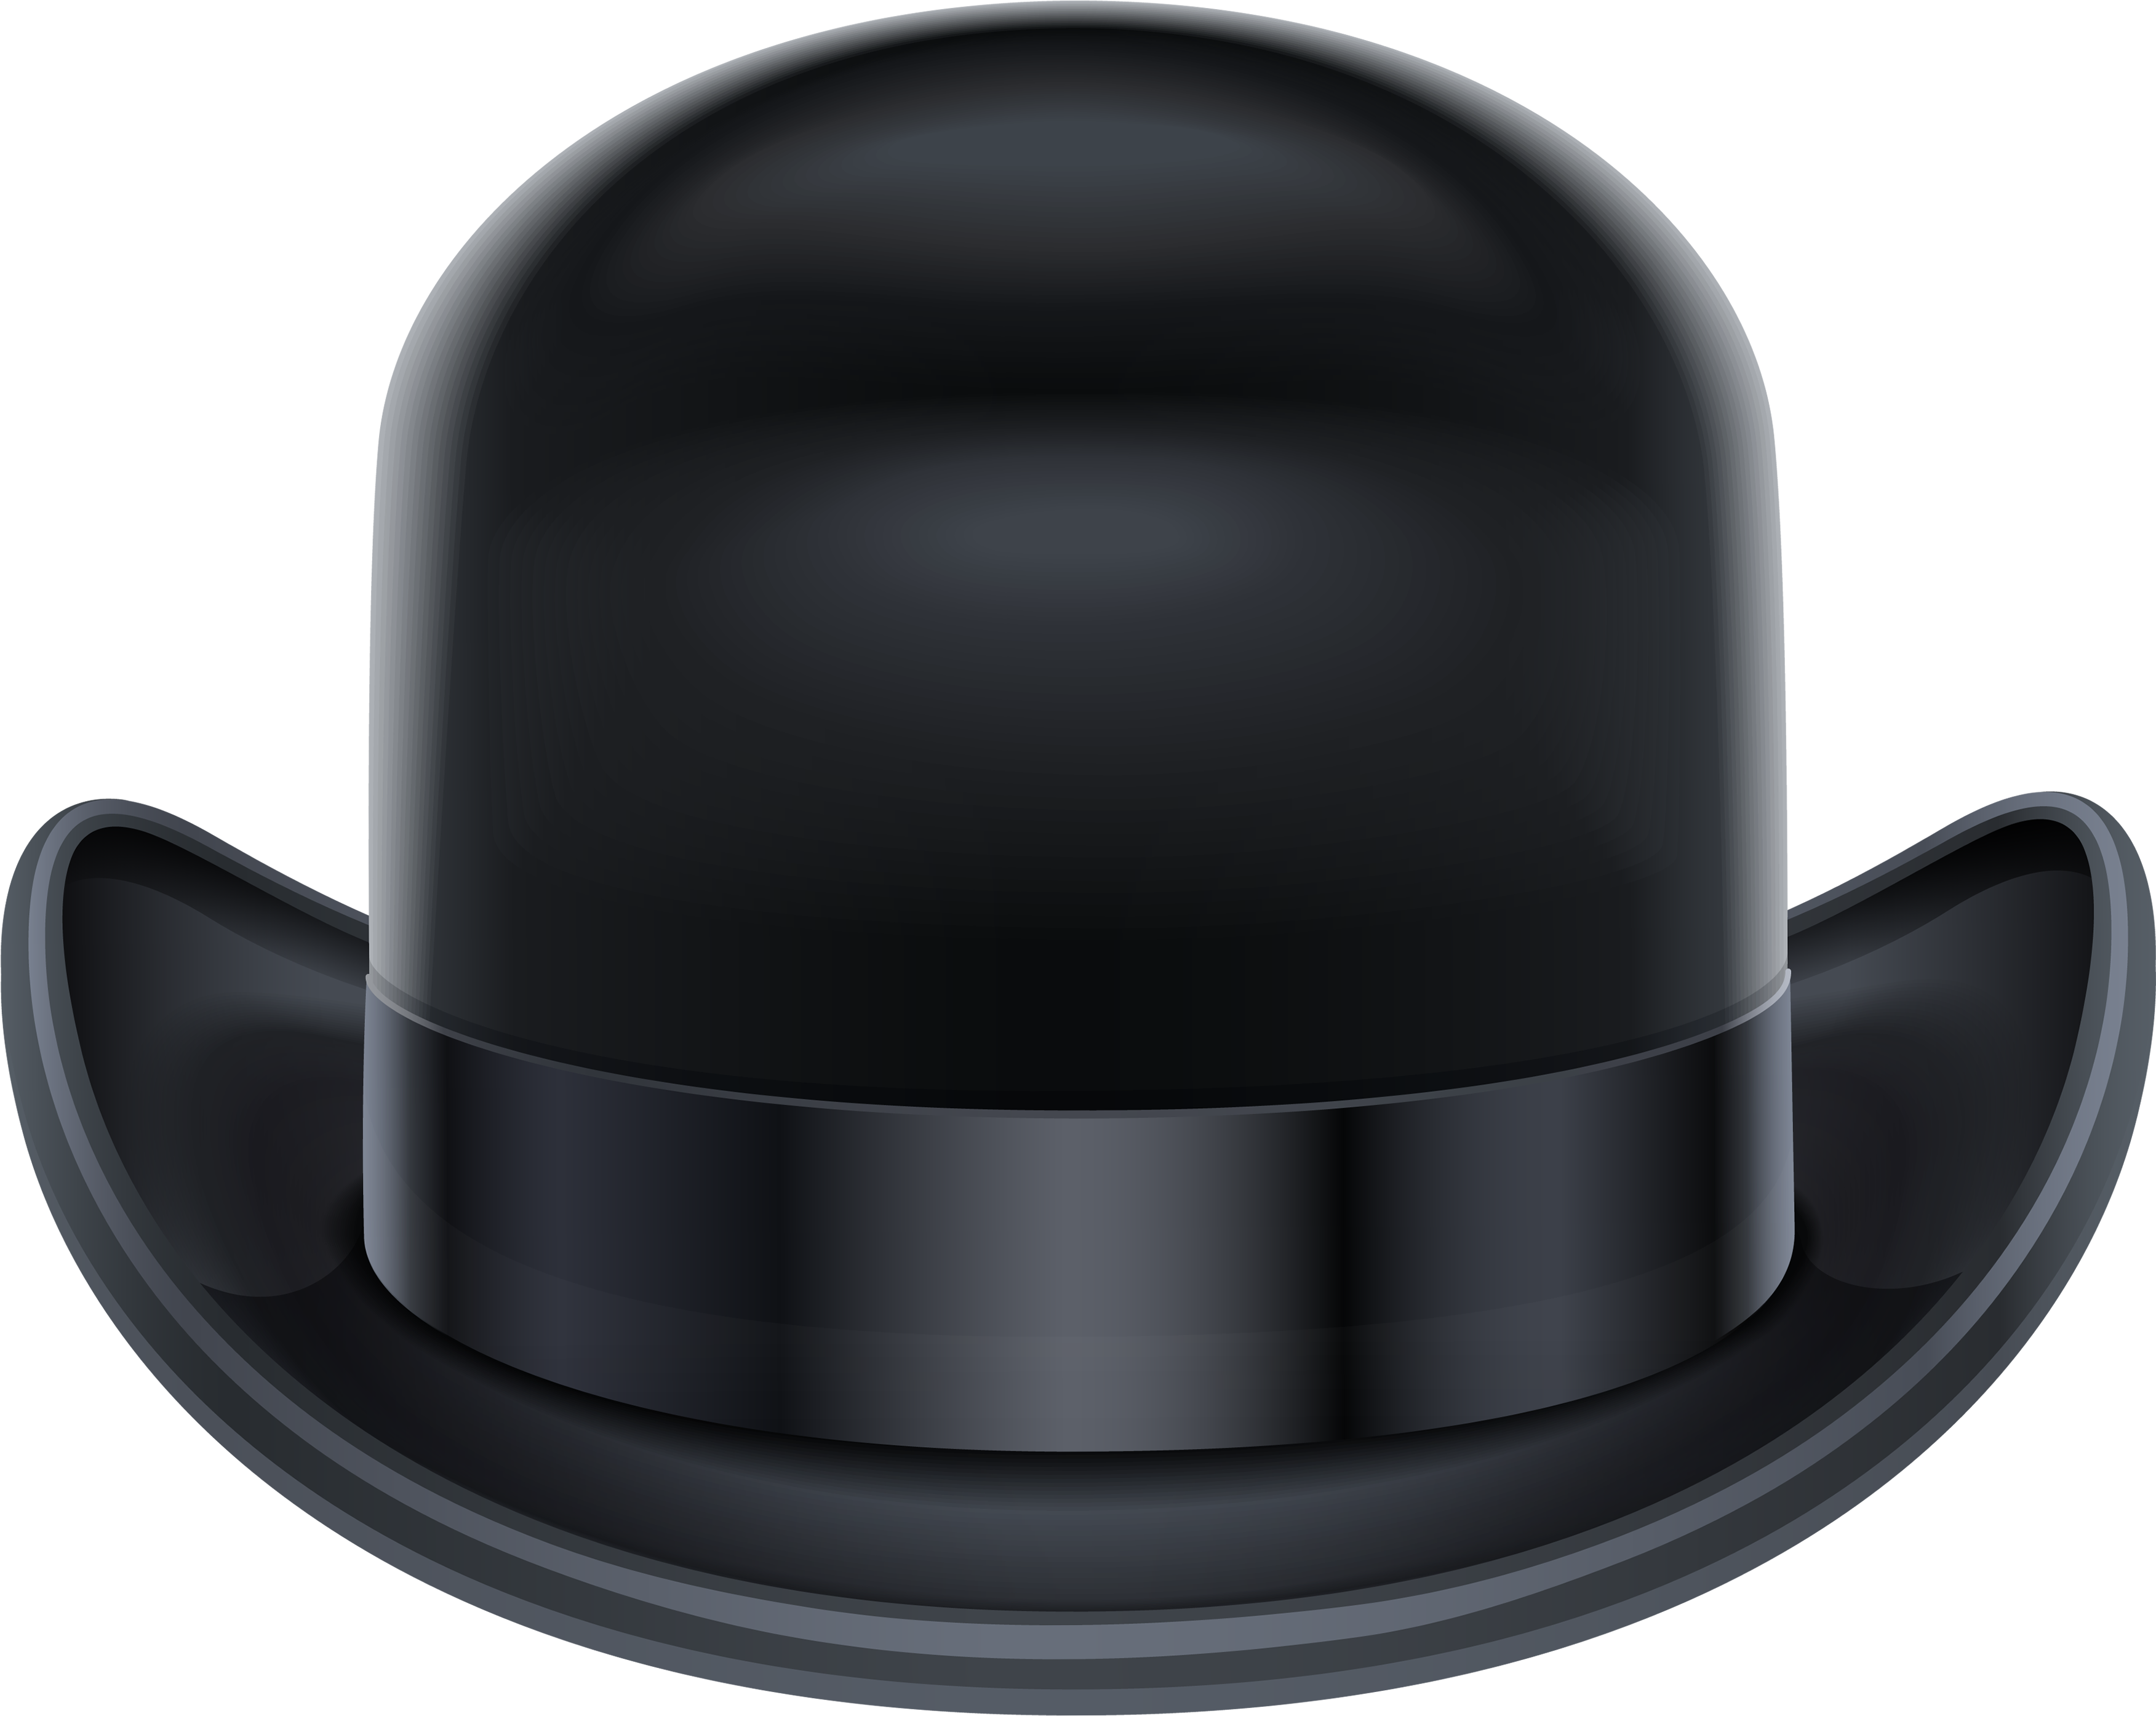 Hats PNG images for free download.